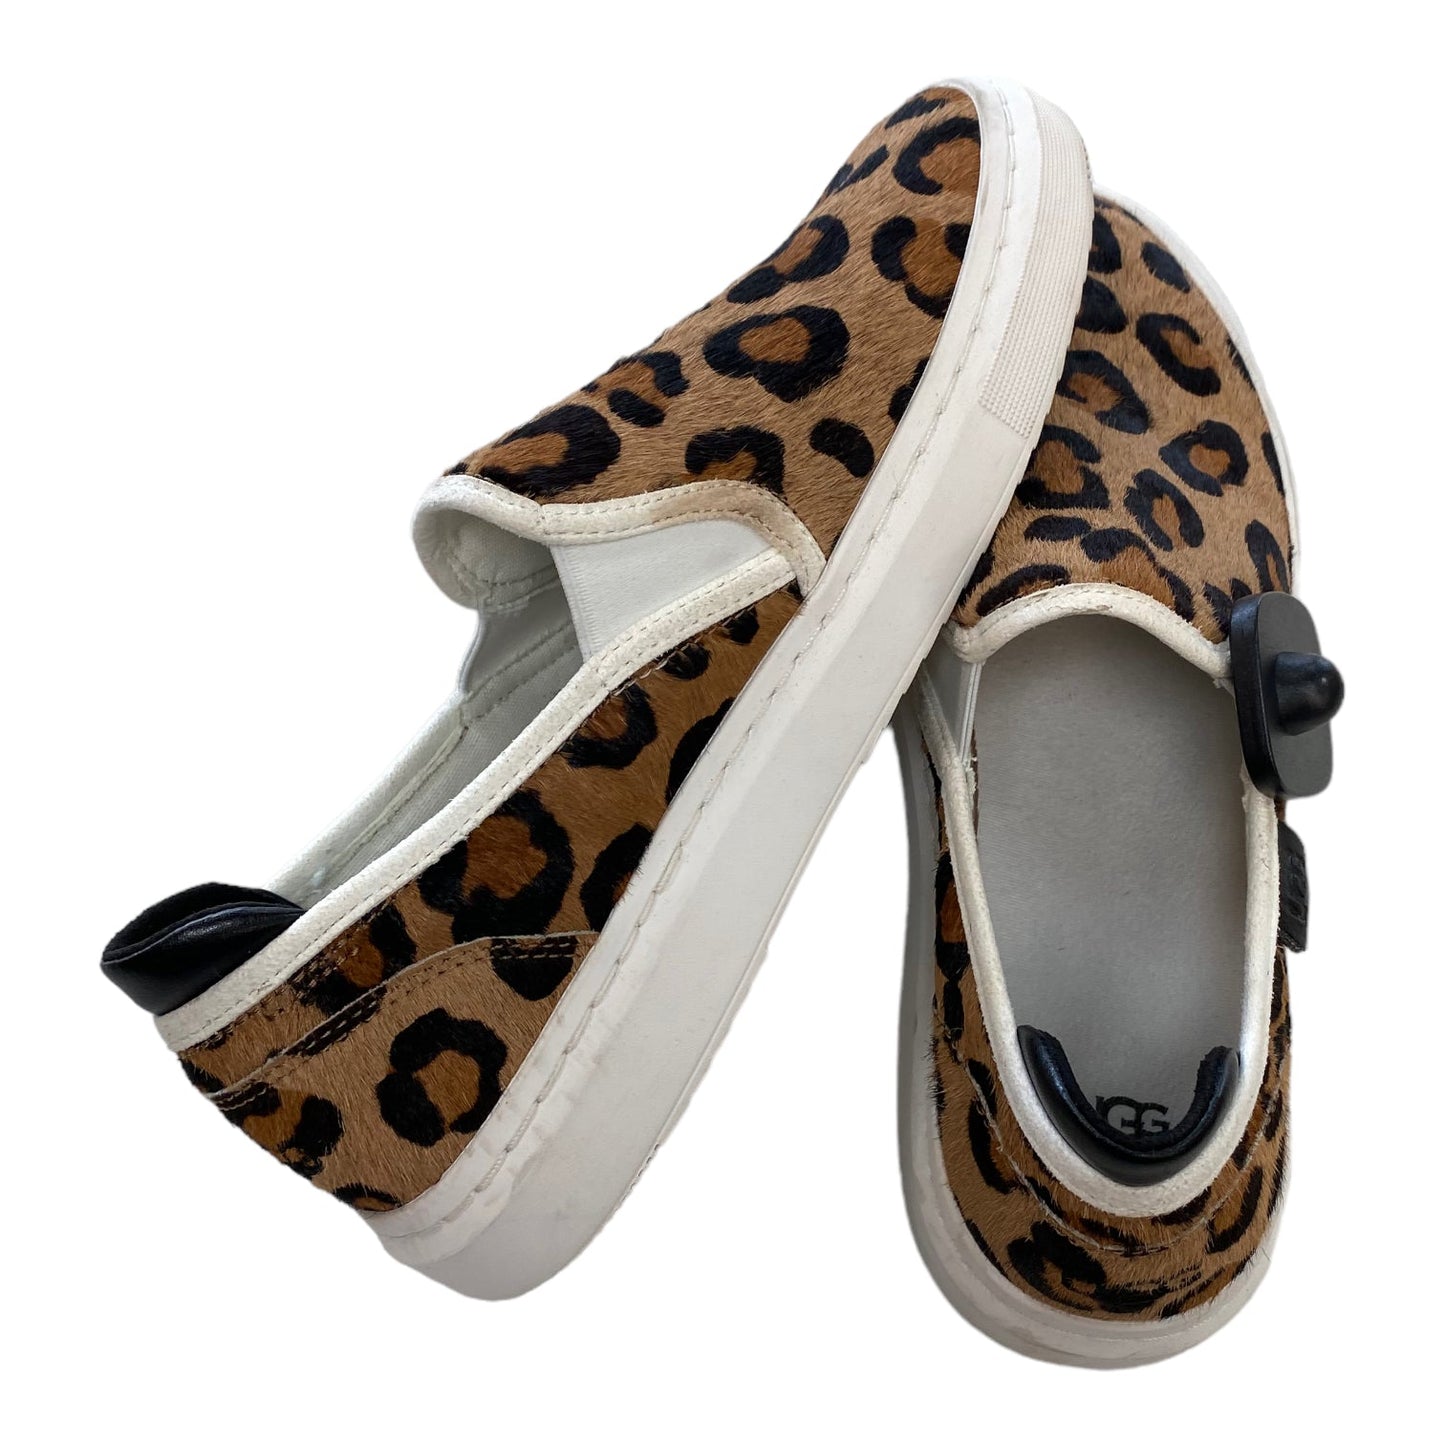 Animal Print Shoes Sneakers Ugg, Size 8